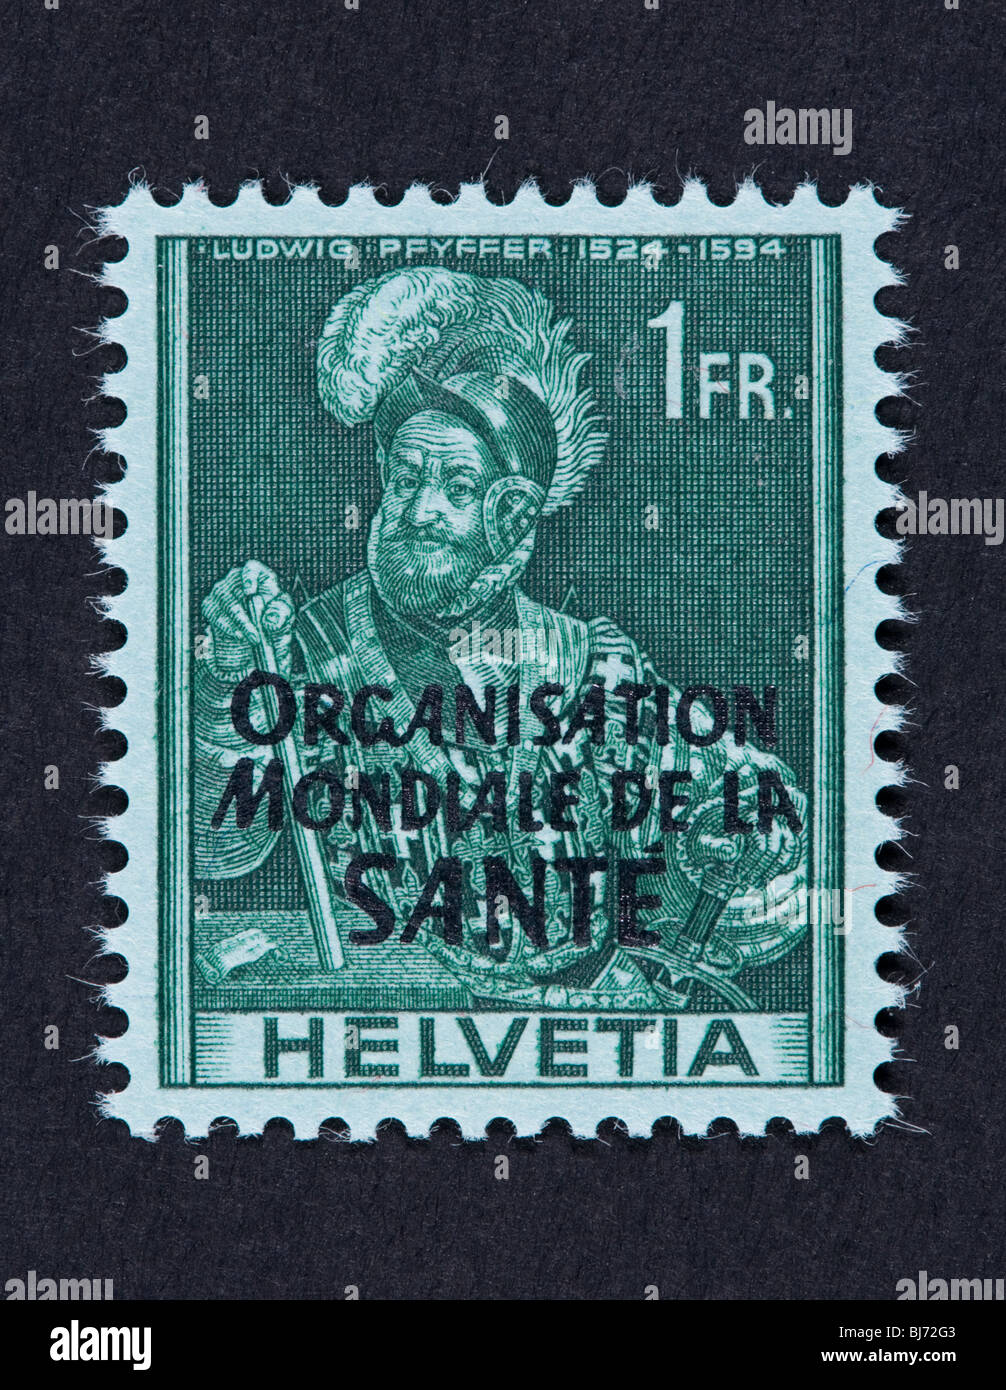 Postage stamp of Switzerland overprinted for use by the World Health Organization, depicting Ludwig Pfyffer. Stock Photo